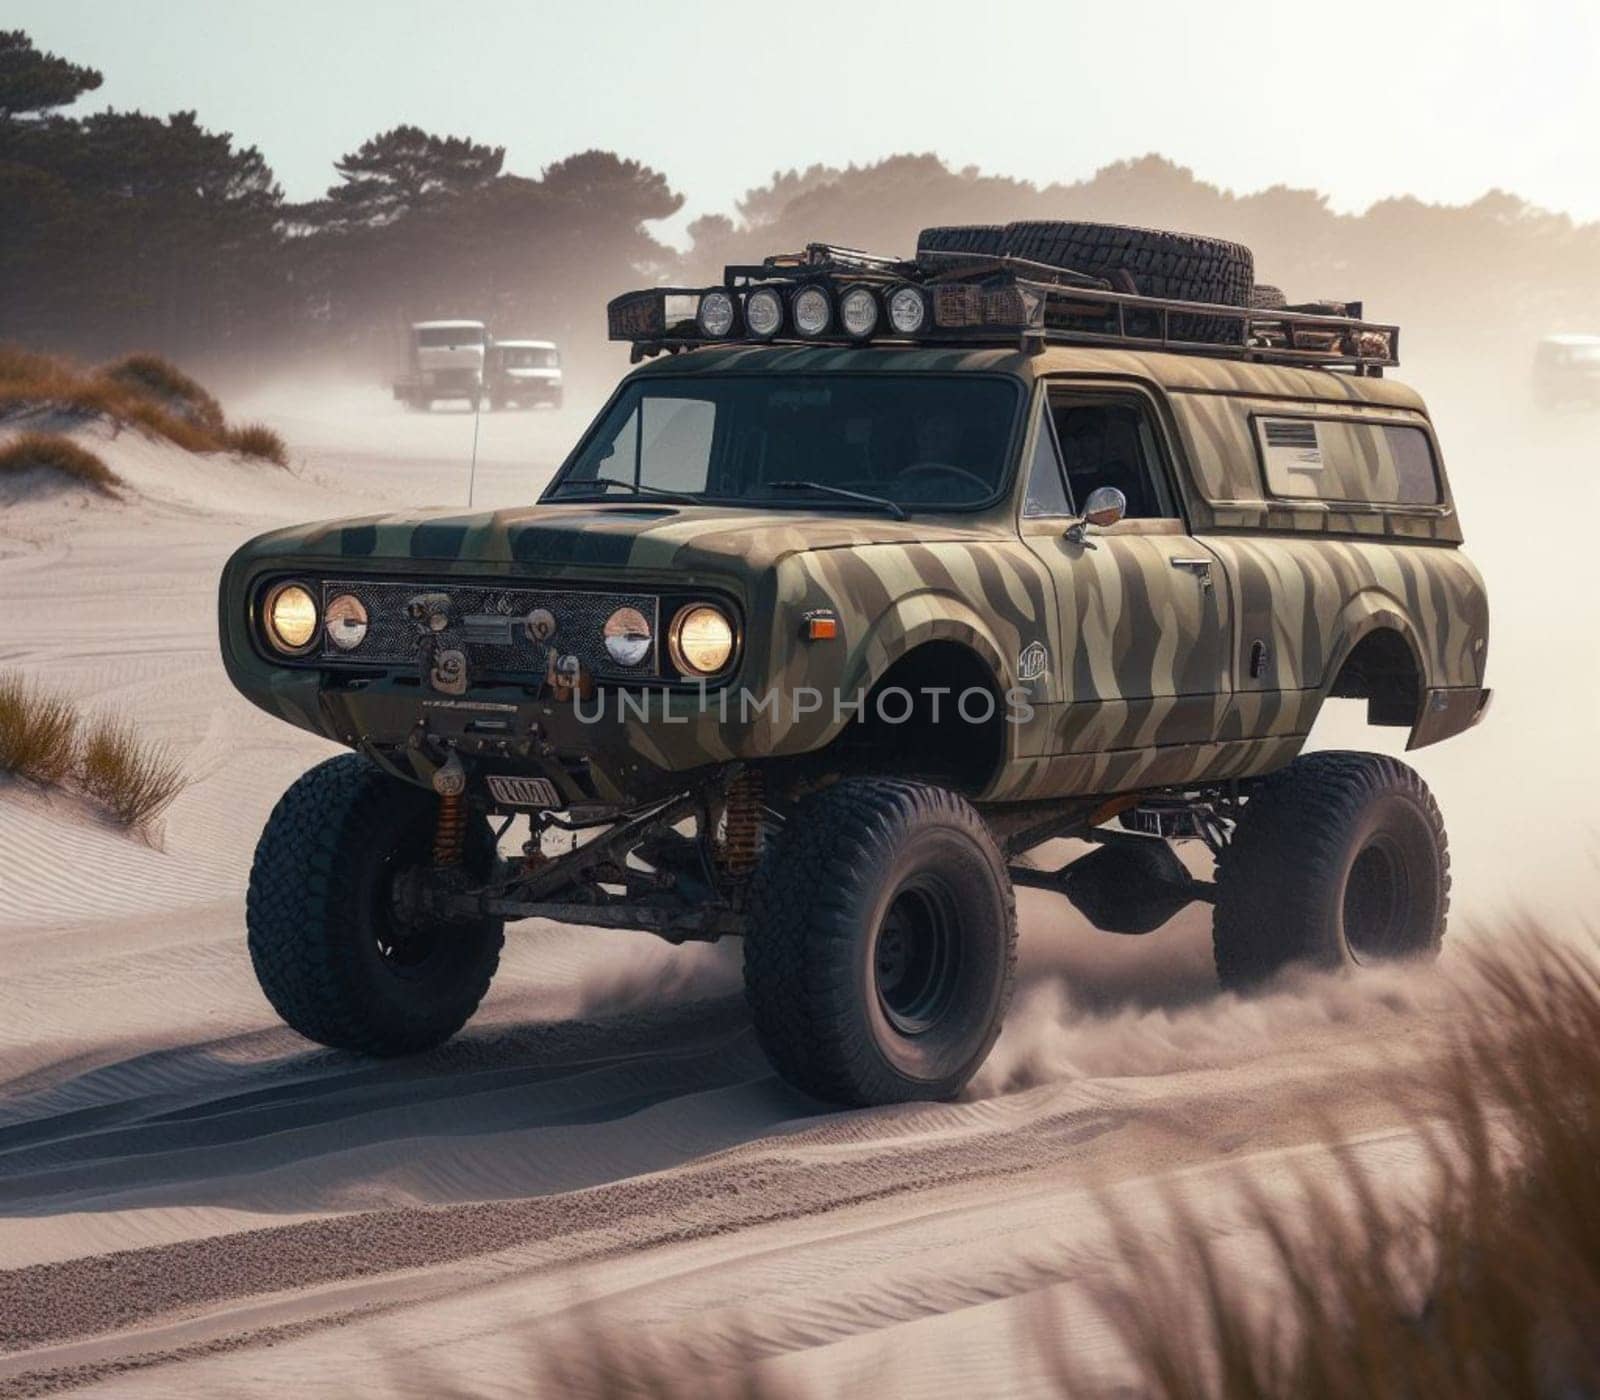 came matte painted camper van offroad lifted 4x4 conversion vehicle circulate on sand jump drift by verbano